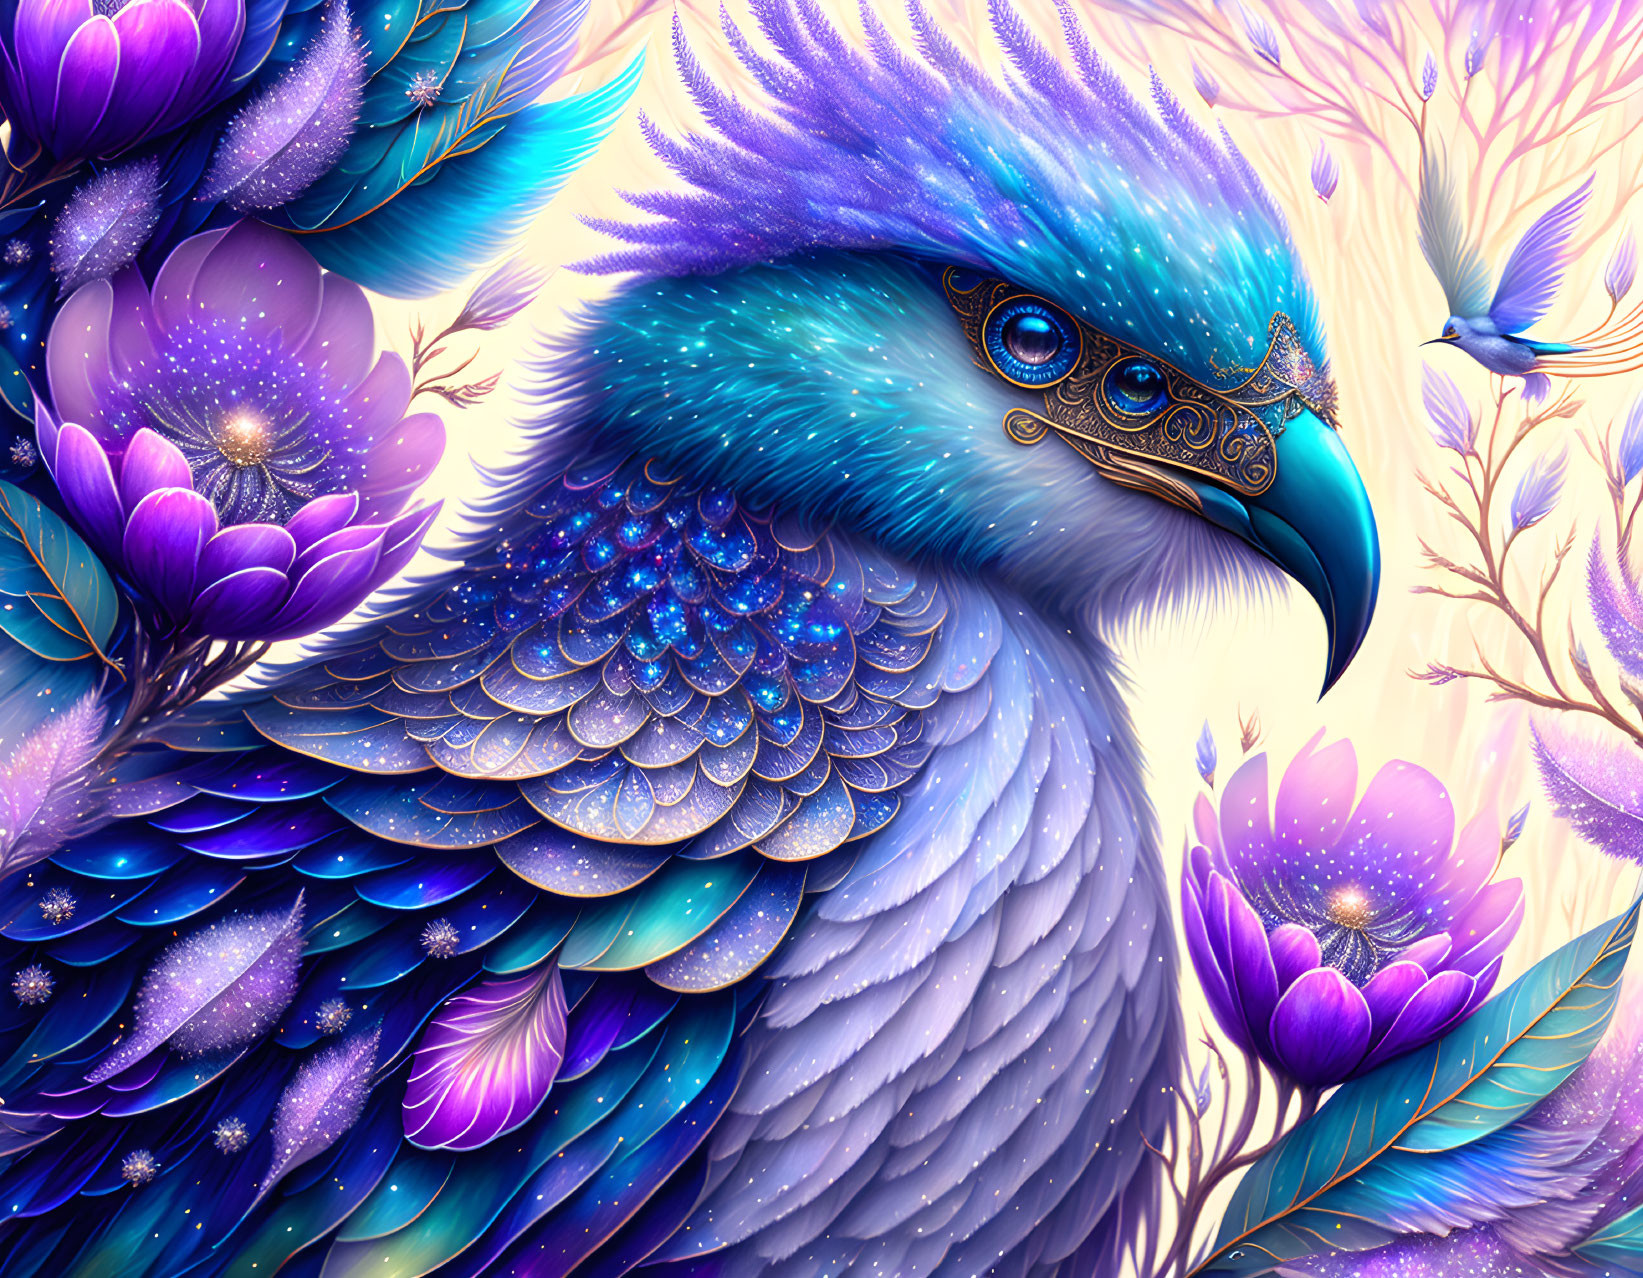 Colorful Mythical Peacock Illustration with Blue and Purple Feathers